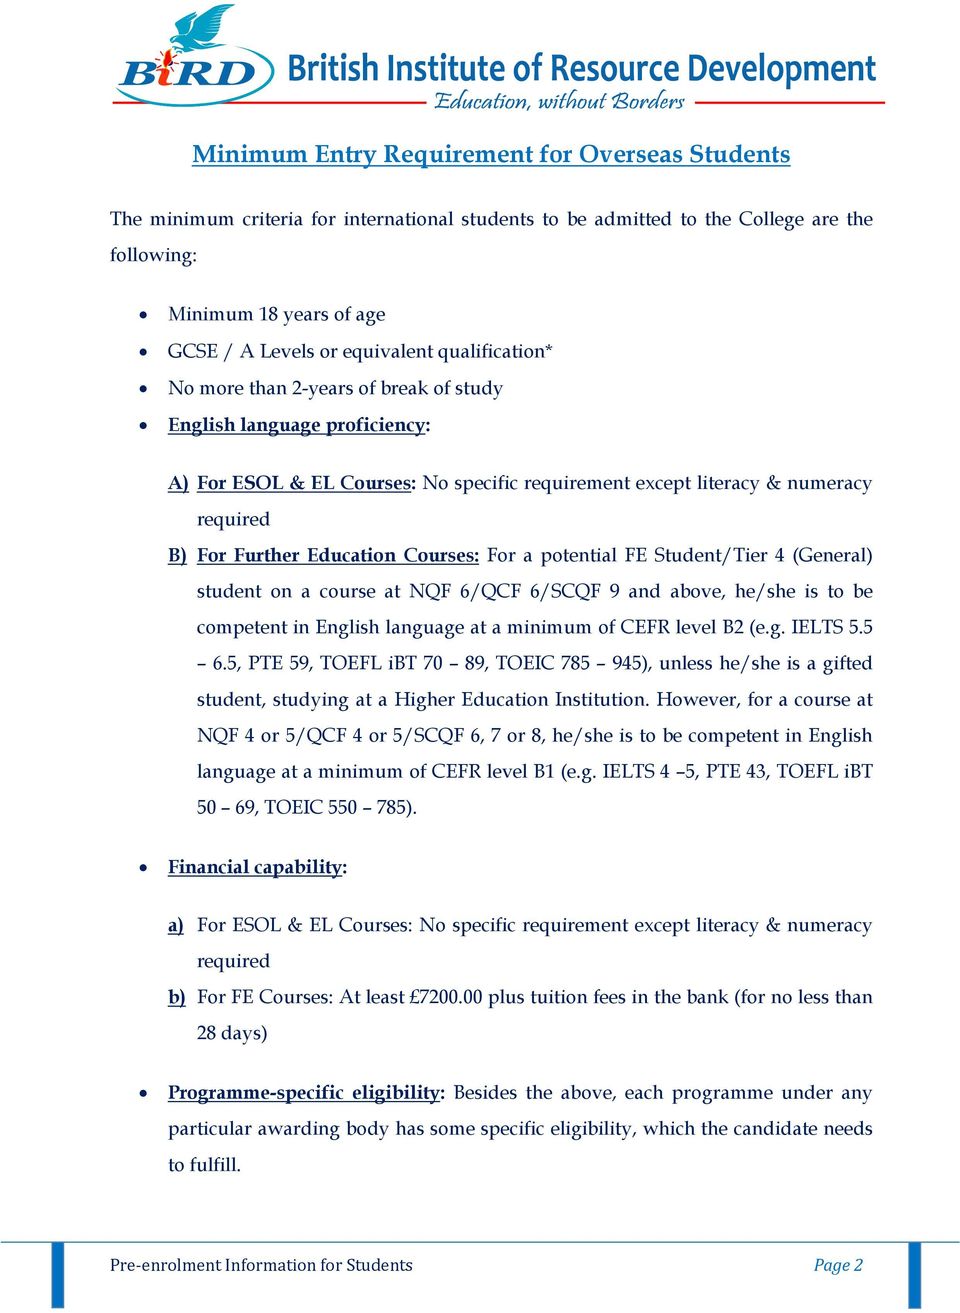 a potential FE Student/Tier 4 (General) student on a course at NQF 6/QCF 6/SCQF 9 and above, he/she is to be competent in English language at a minimum of CEFR level B2 (e.g. IELTS 5.5 6.